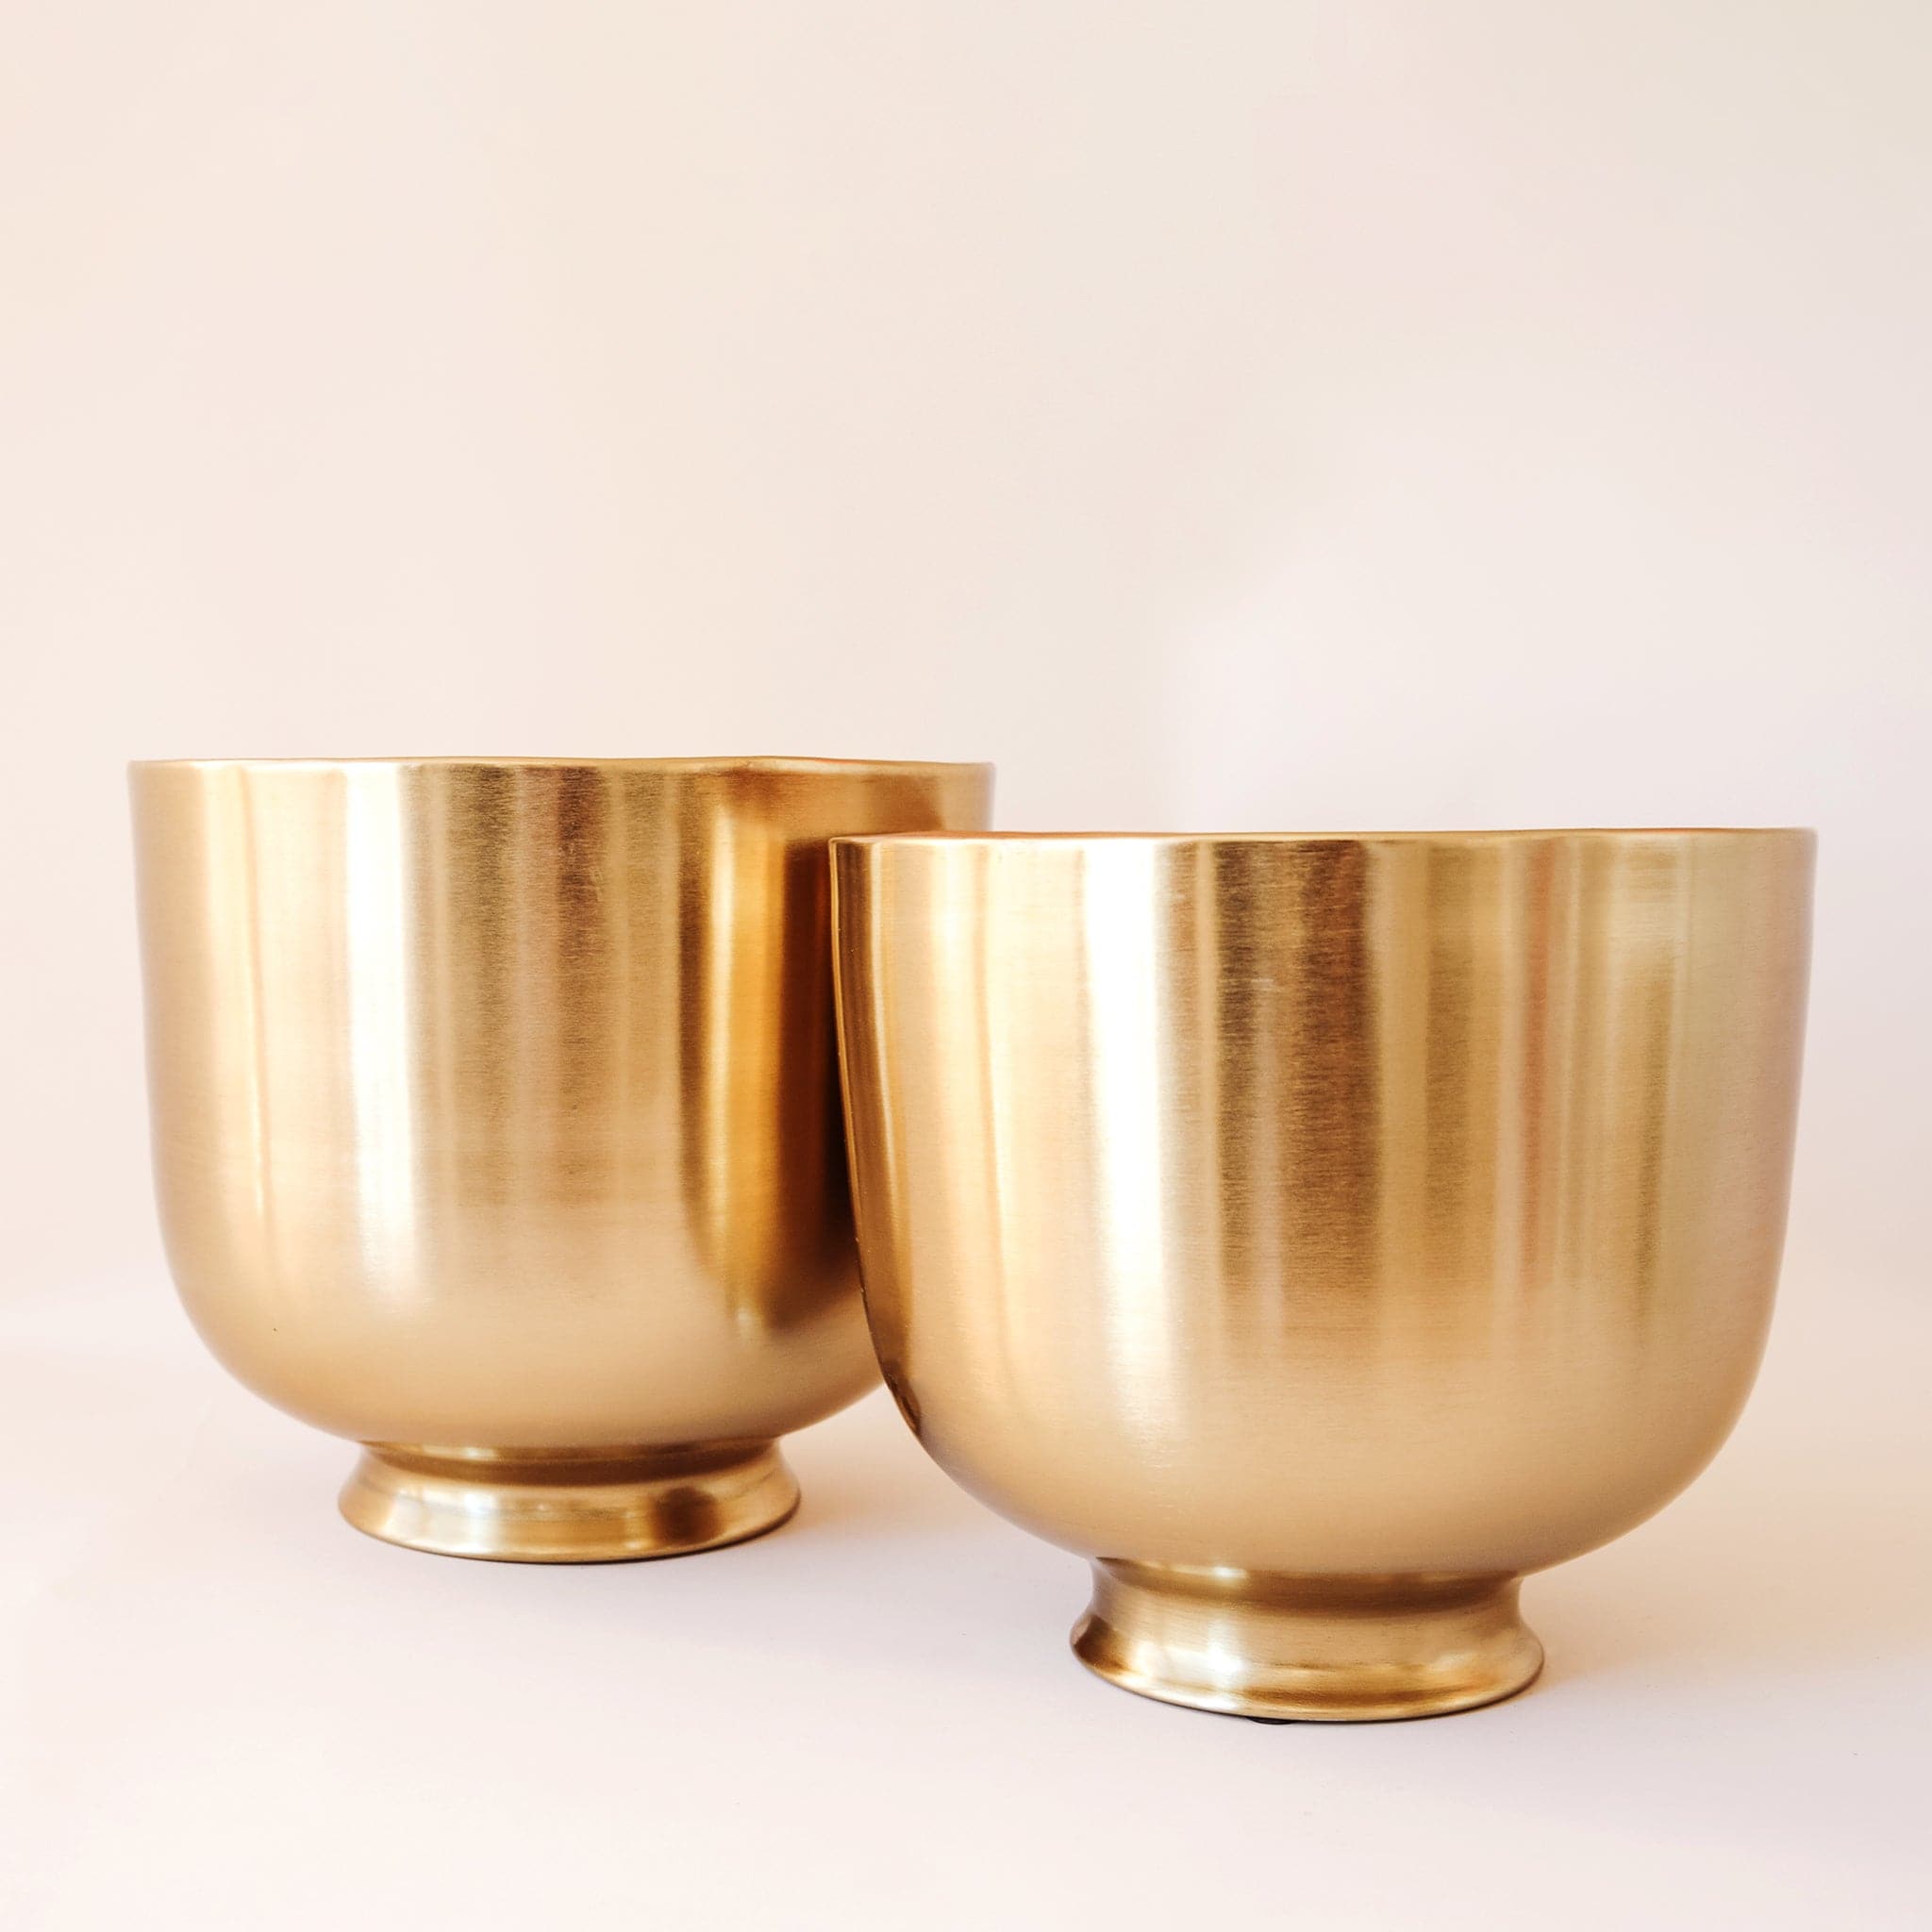 The sunglow planter has a gold metal finish, making it reflective to the light. It has a round shape with a tapered bottom. 